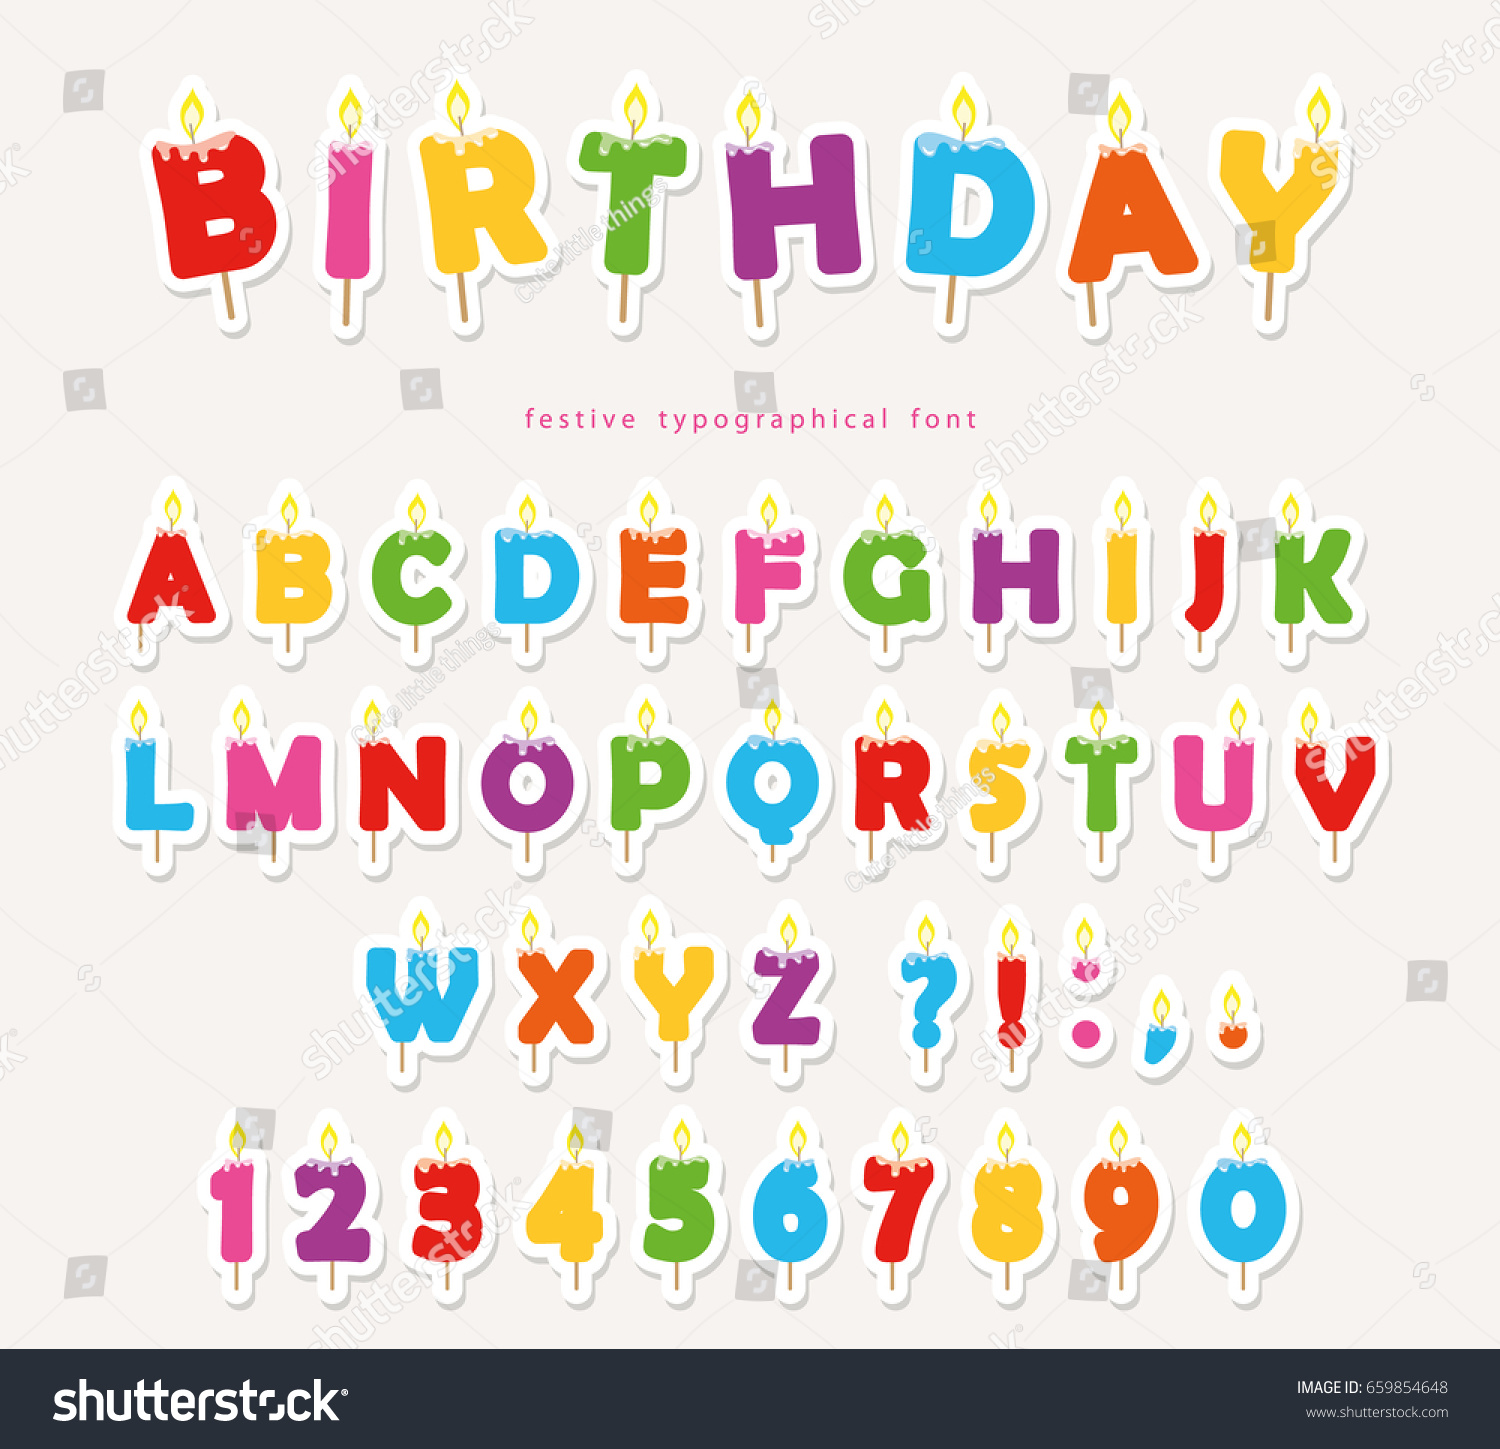 SVG of Birthday candles colorful font design. Bright festive ABC letters and numbers. Paper cutout stickers. svg